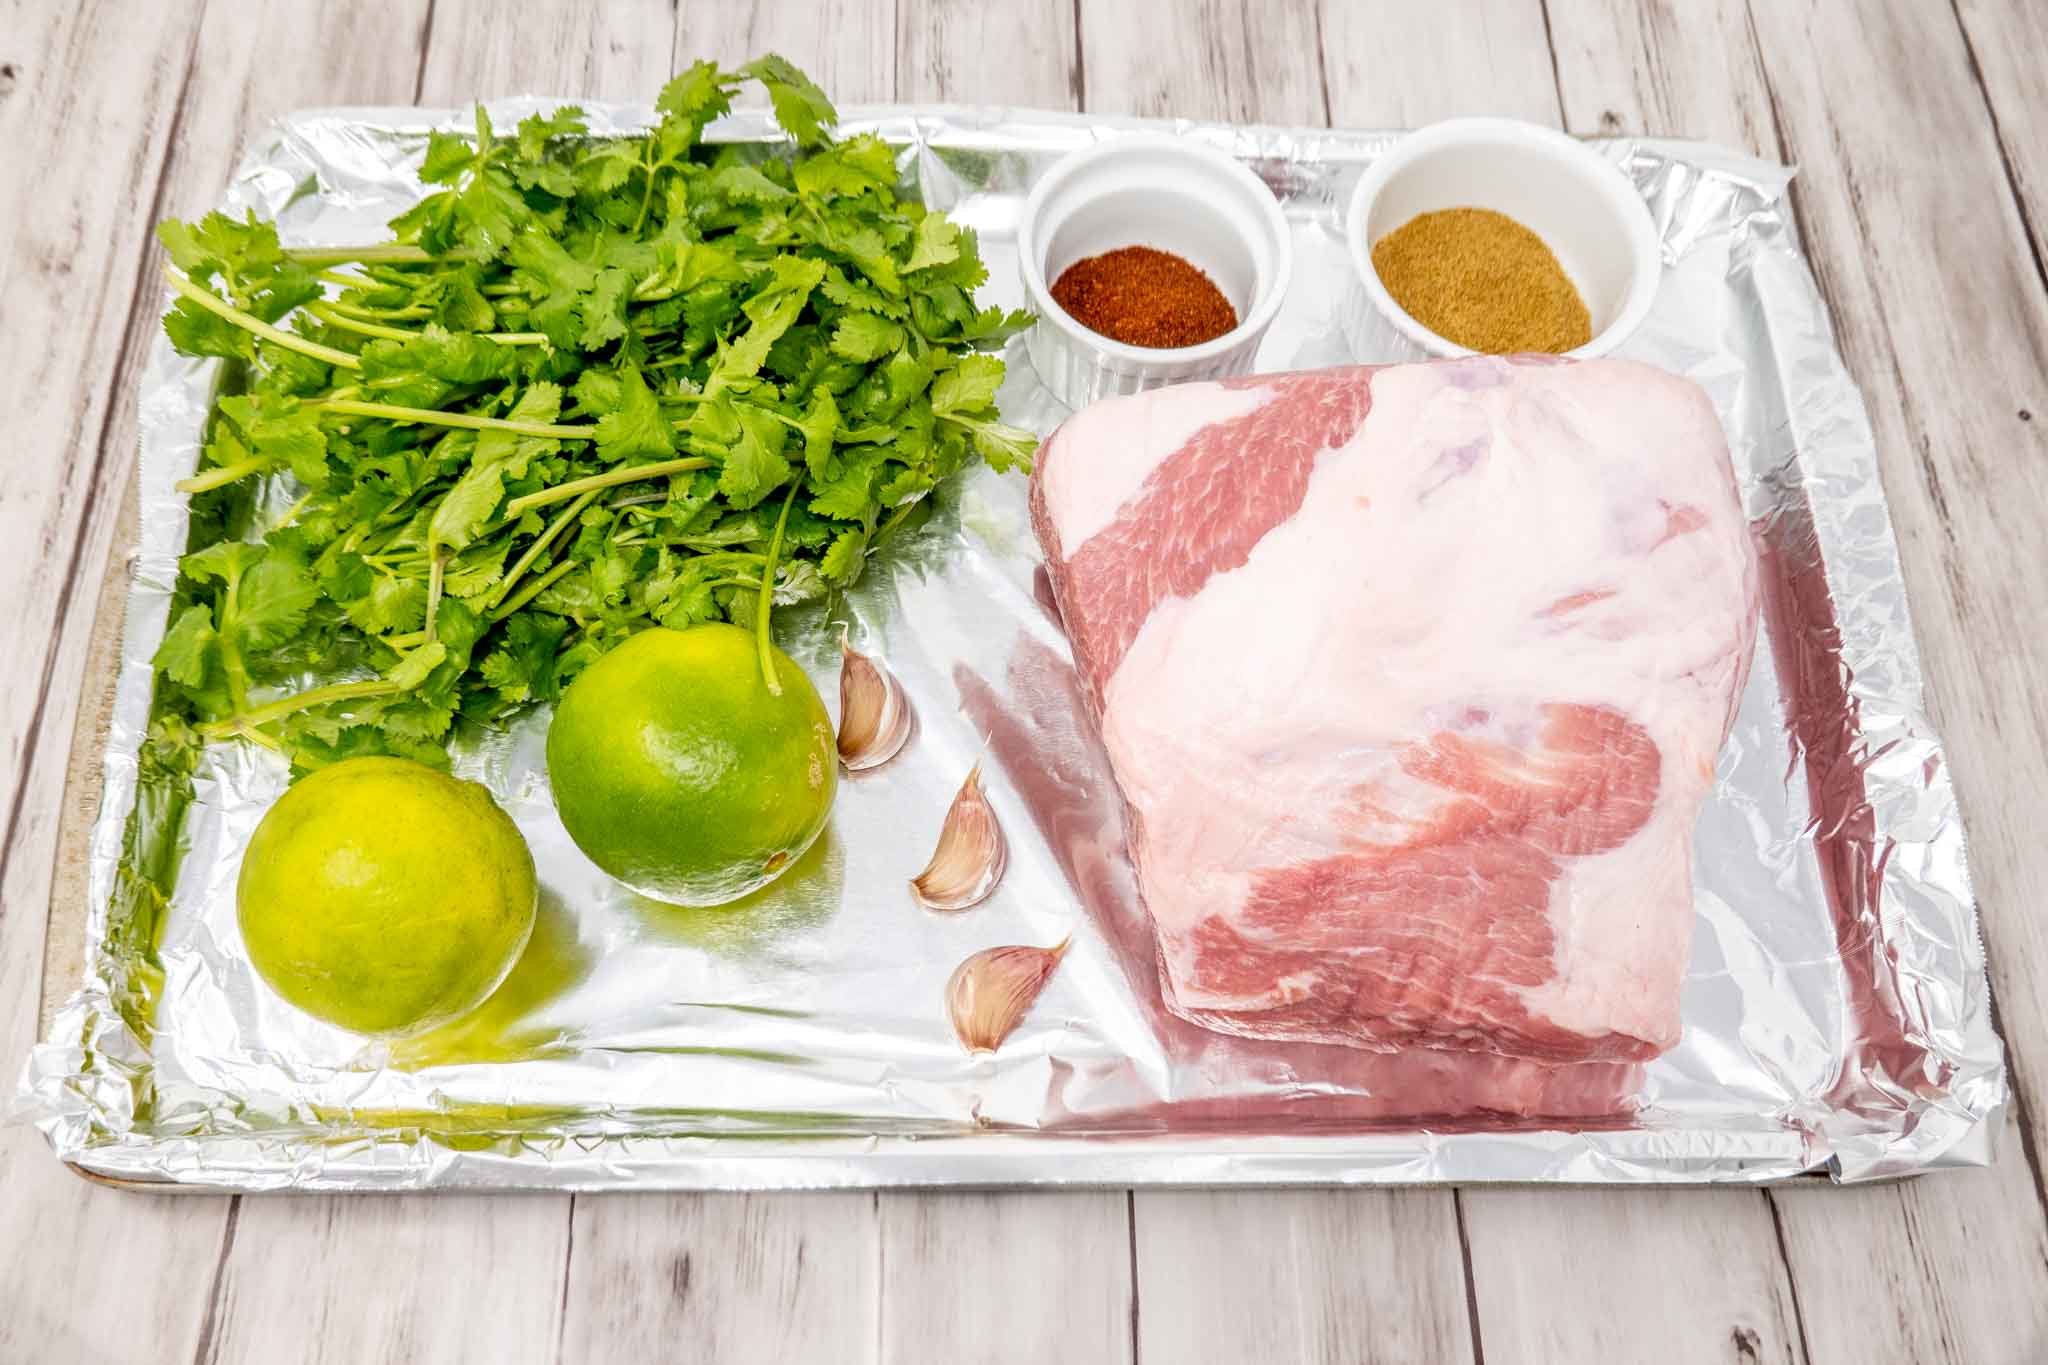 Pork shoulder, spices, garlic, limes, and cilantro on a foil-covered tray